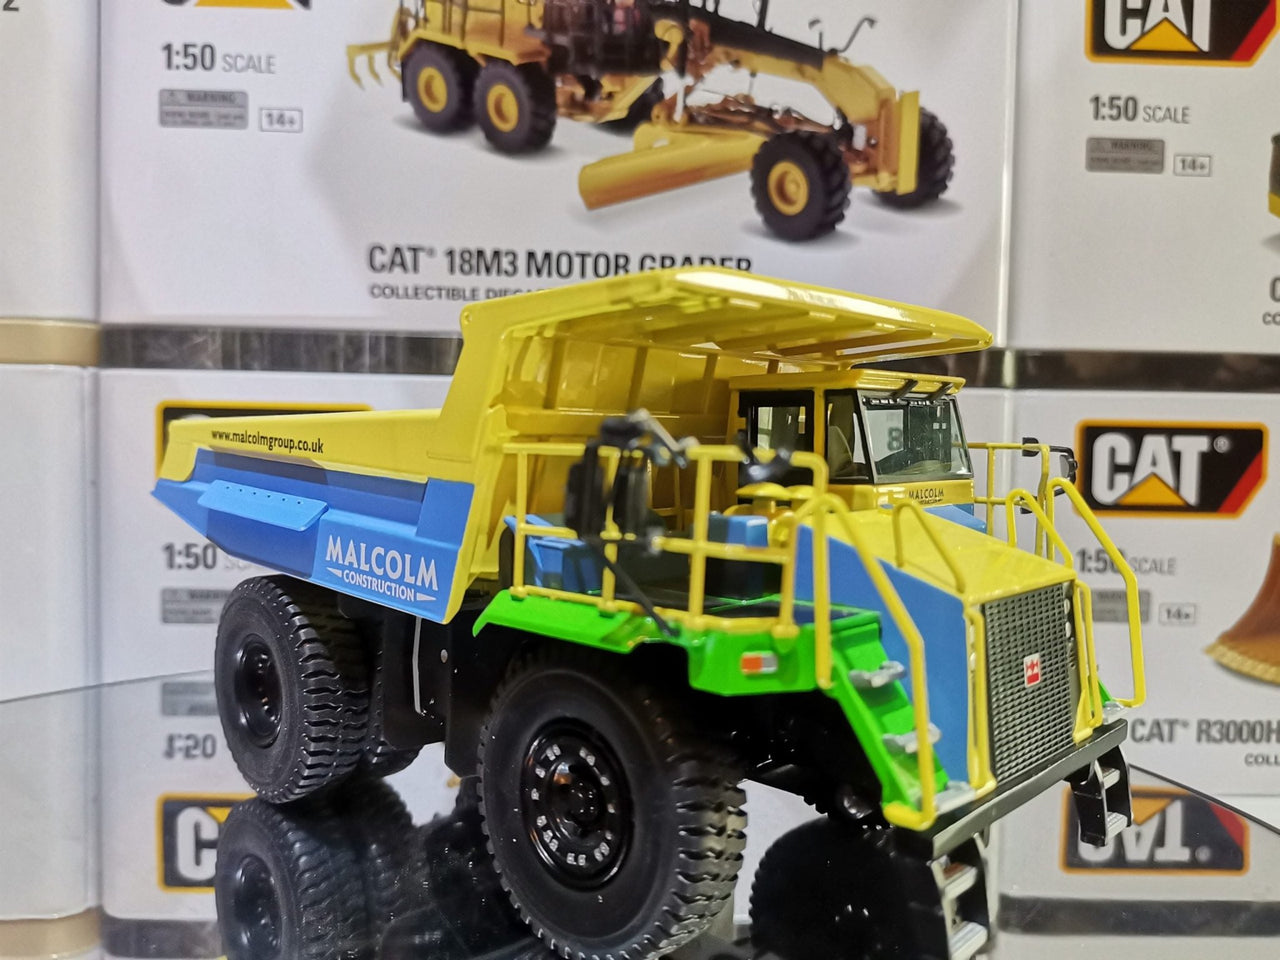 771-01 Terex TR60 Mining Truck 1:50 Scale (Discontinued Model)